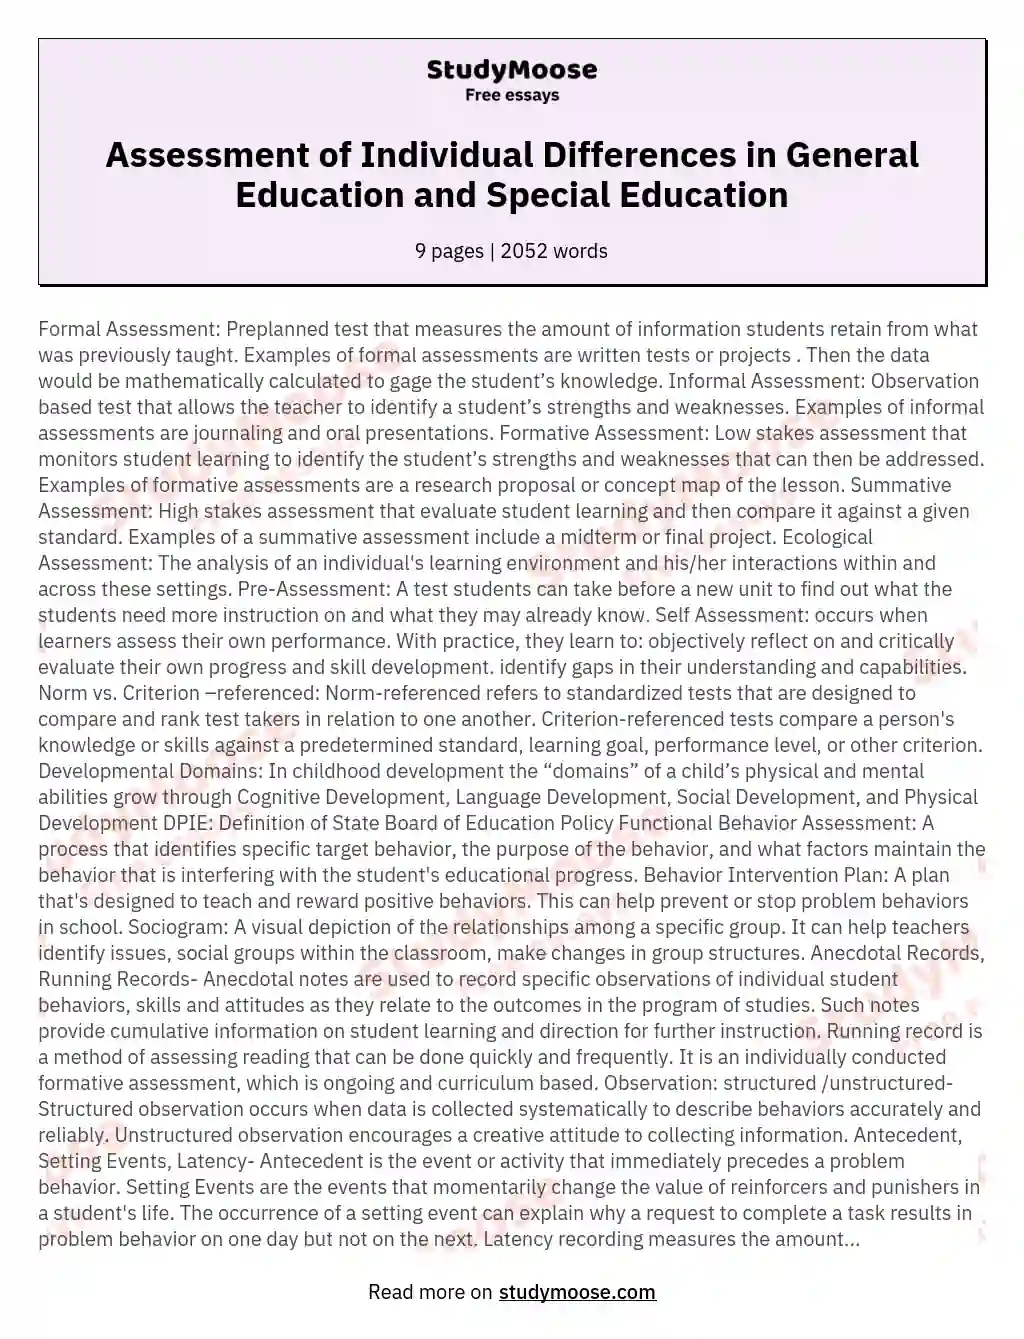 Assessment of Individual Differences in General Education and Special Education essay